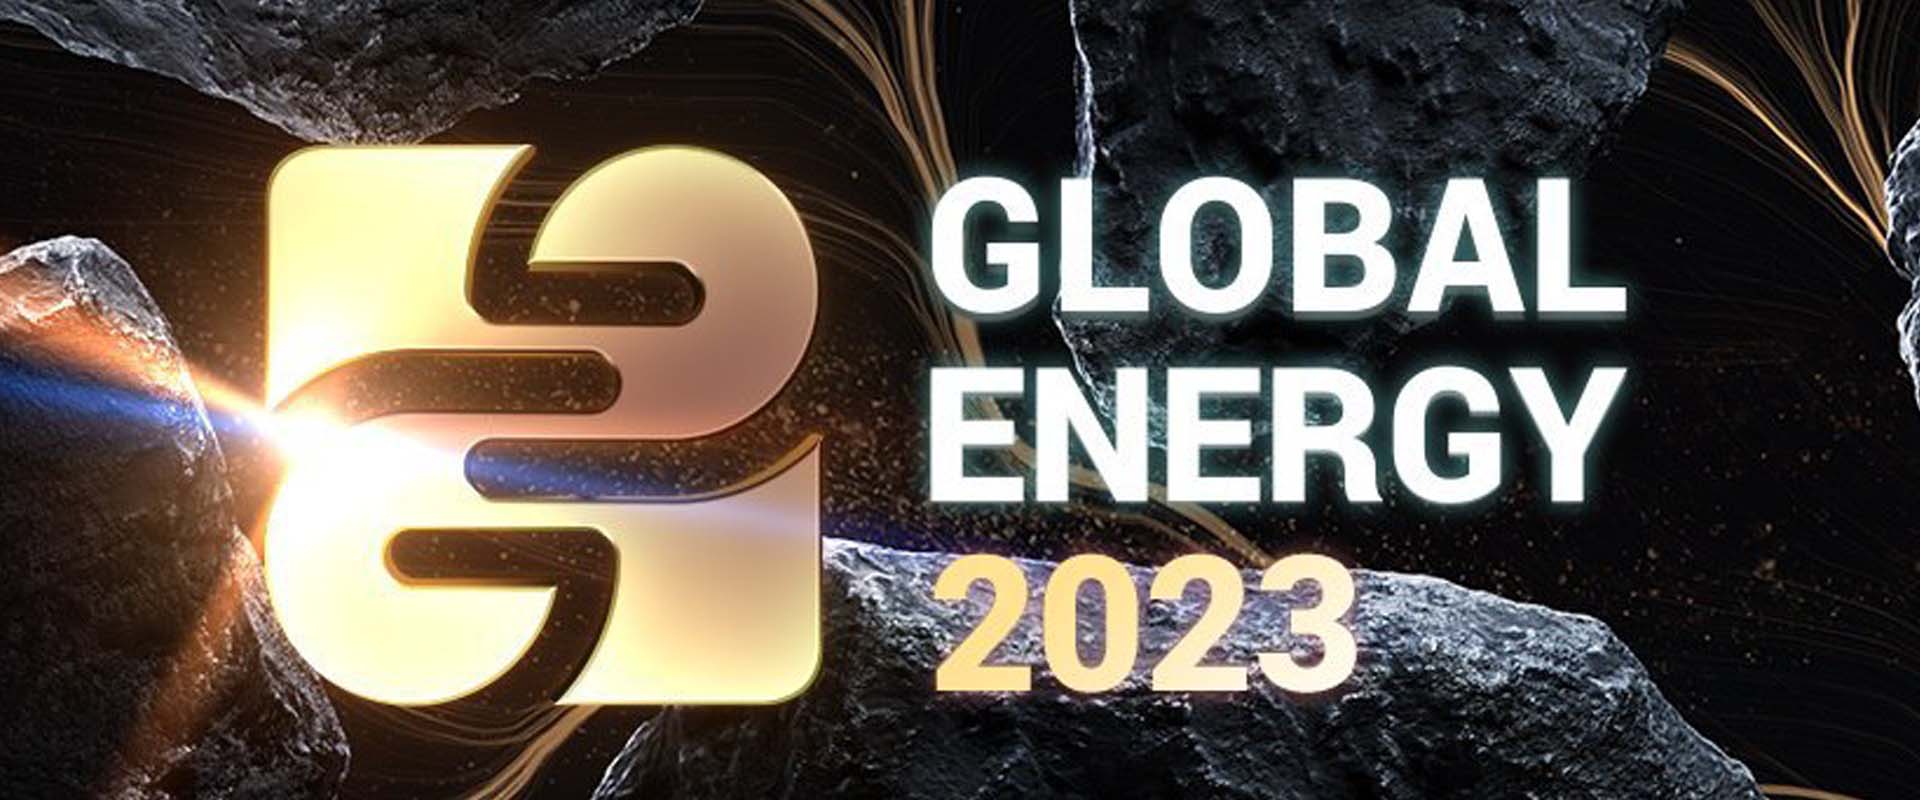 China’s Scientists Receive the 2023 Global Energy Prize